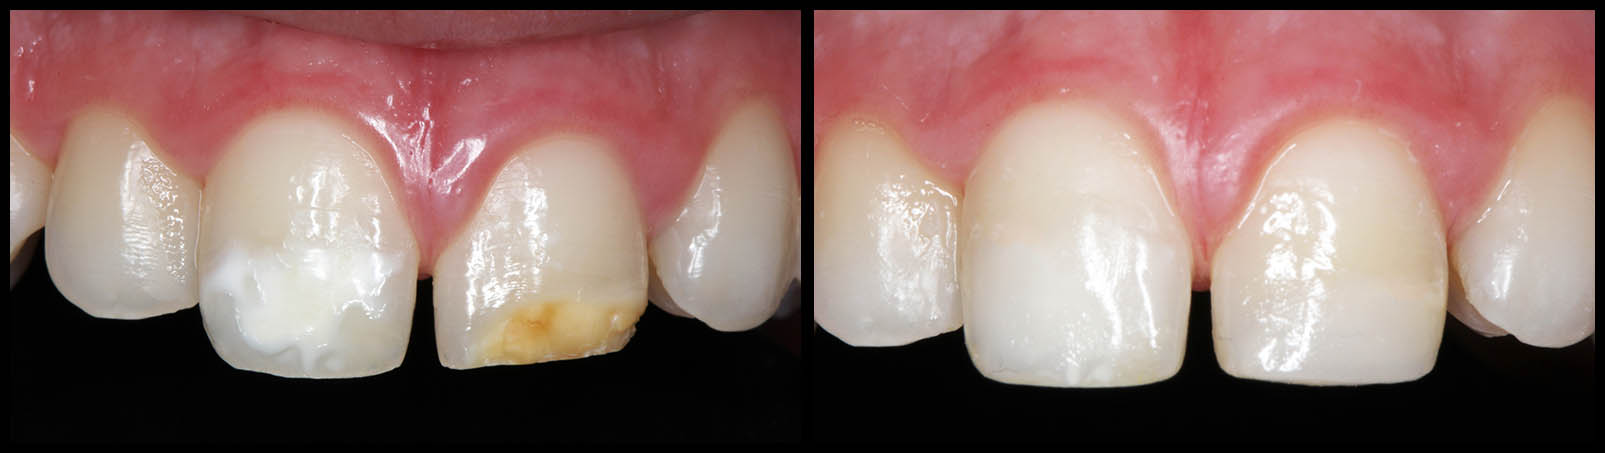 Dental filling before and after at Bunker Hill Dentistry